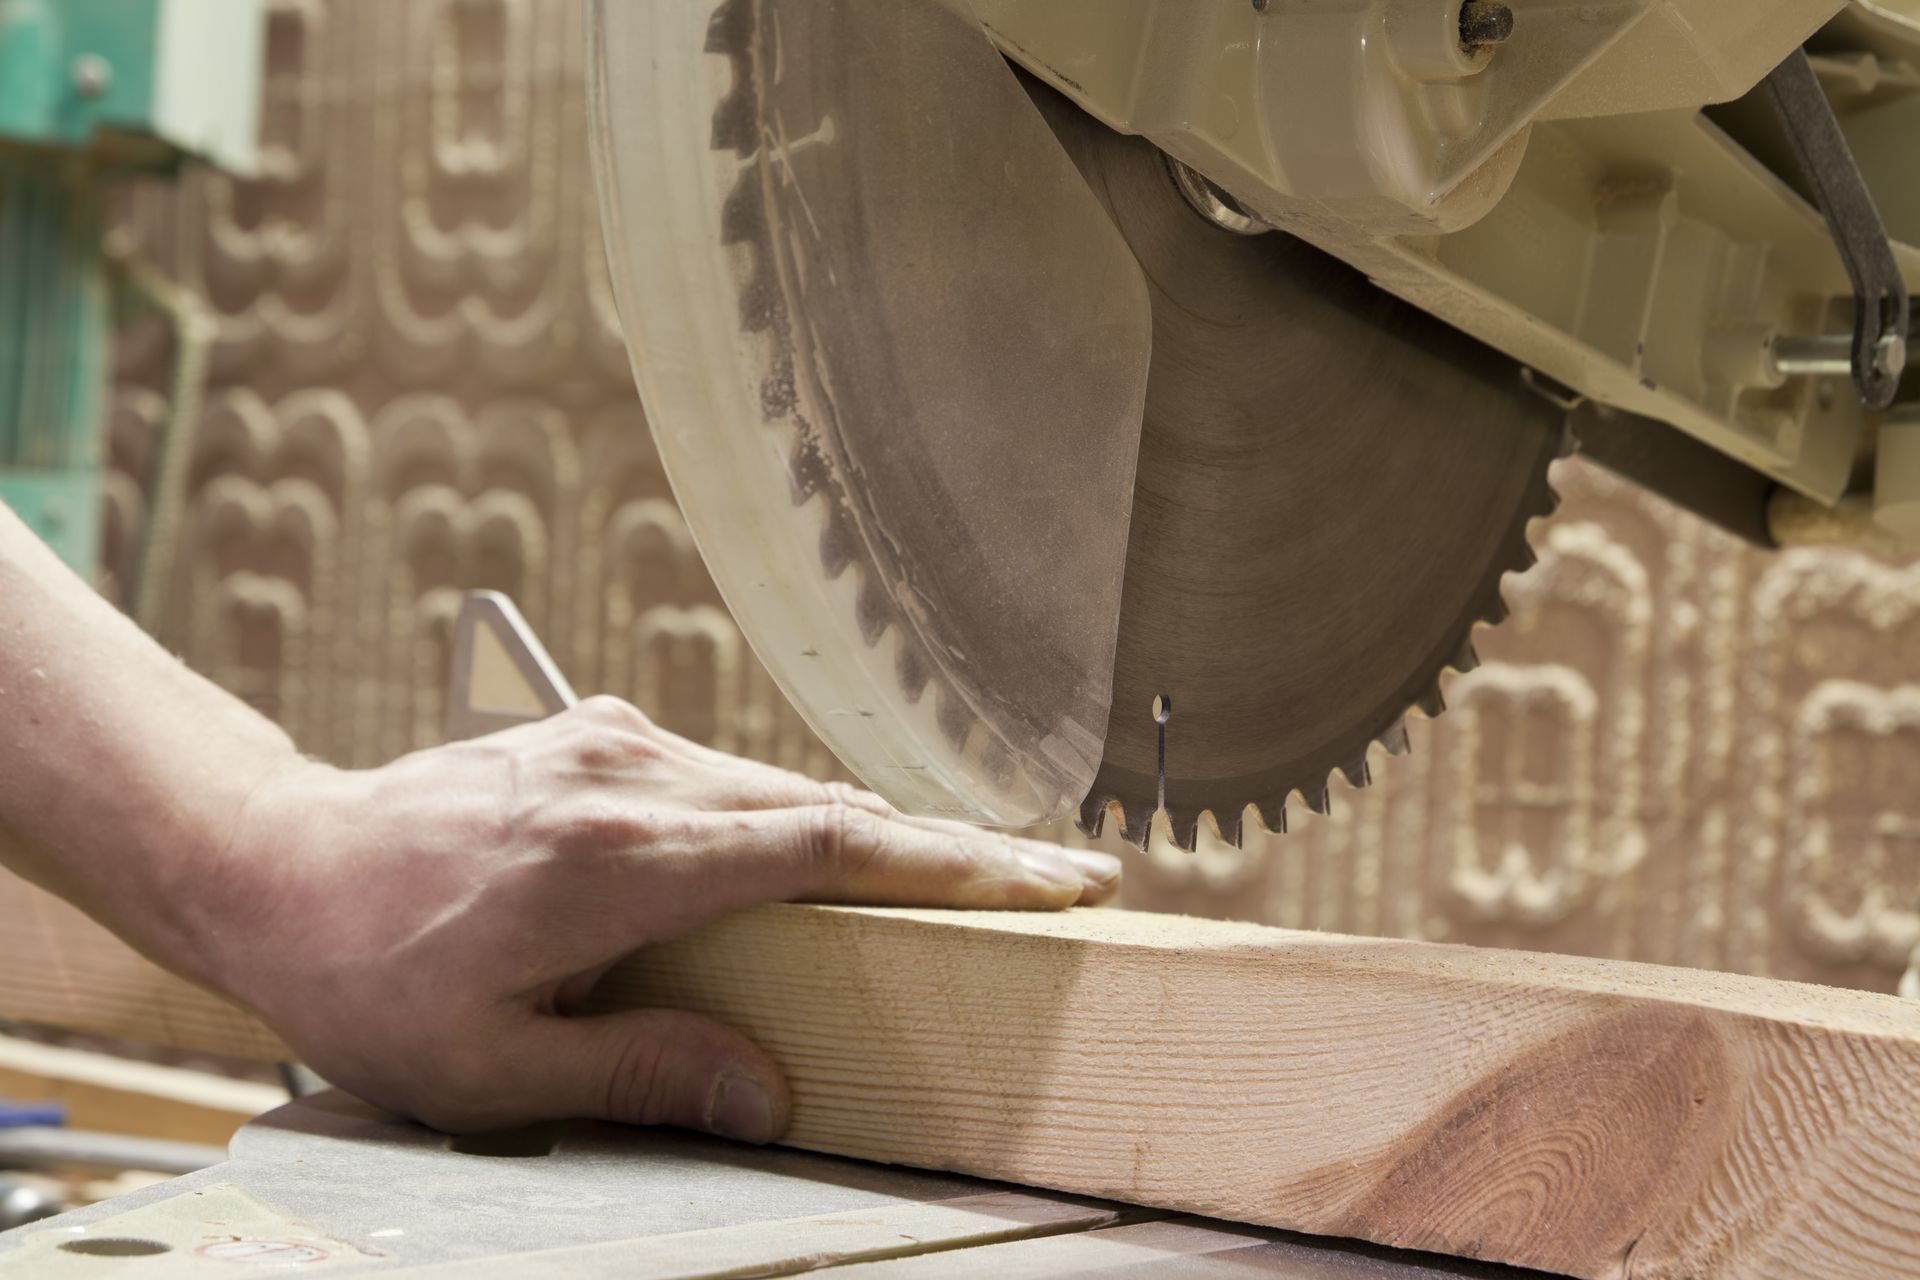 A person is cutting a piece of wood with a circular saw.